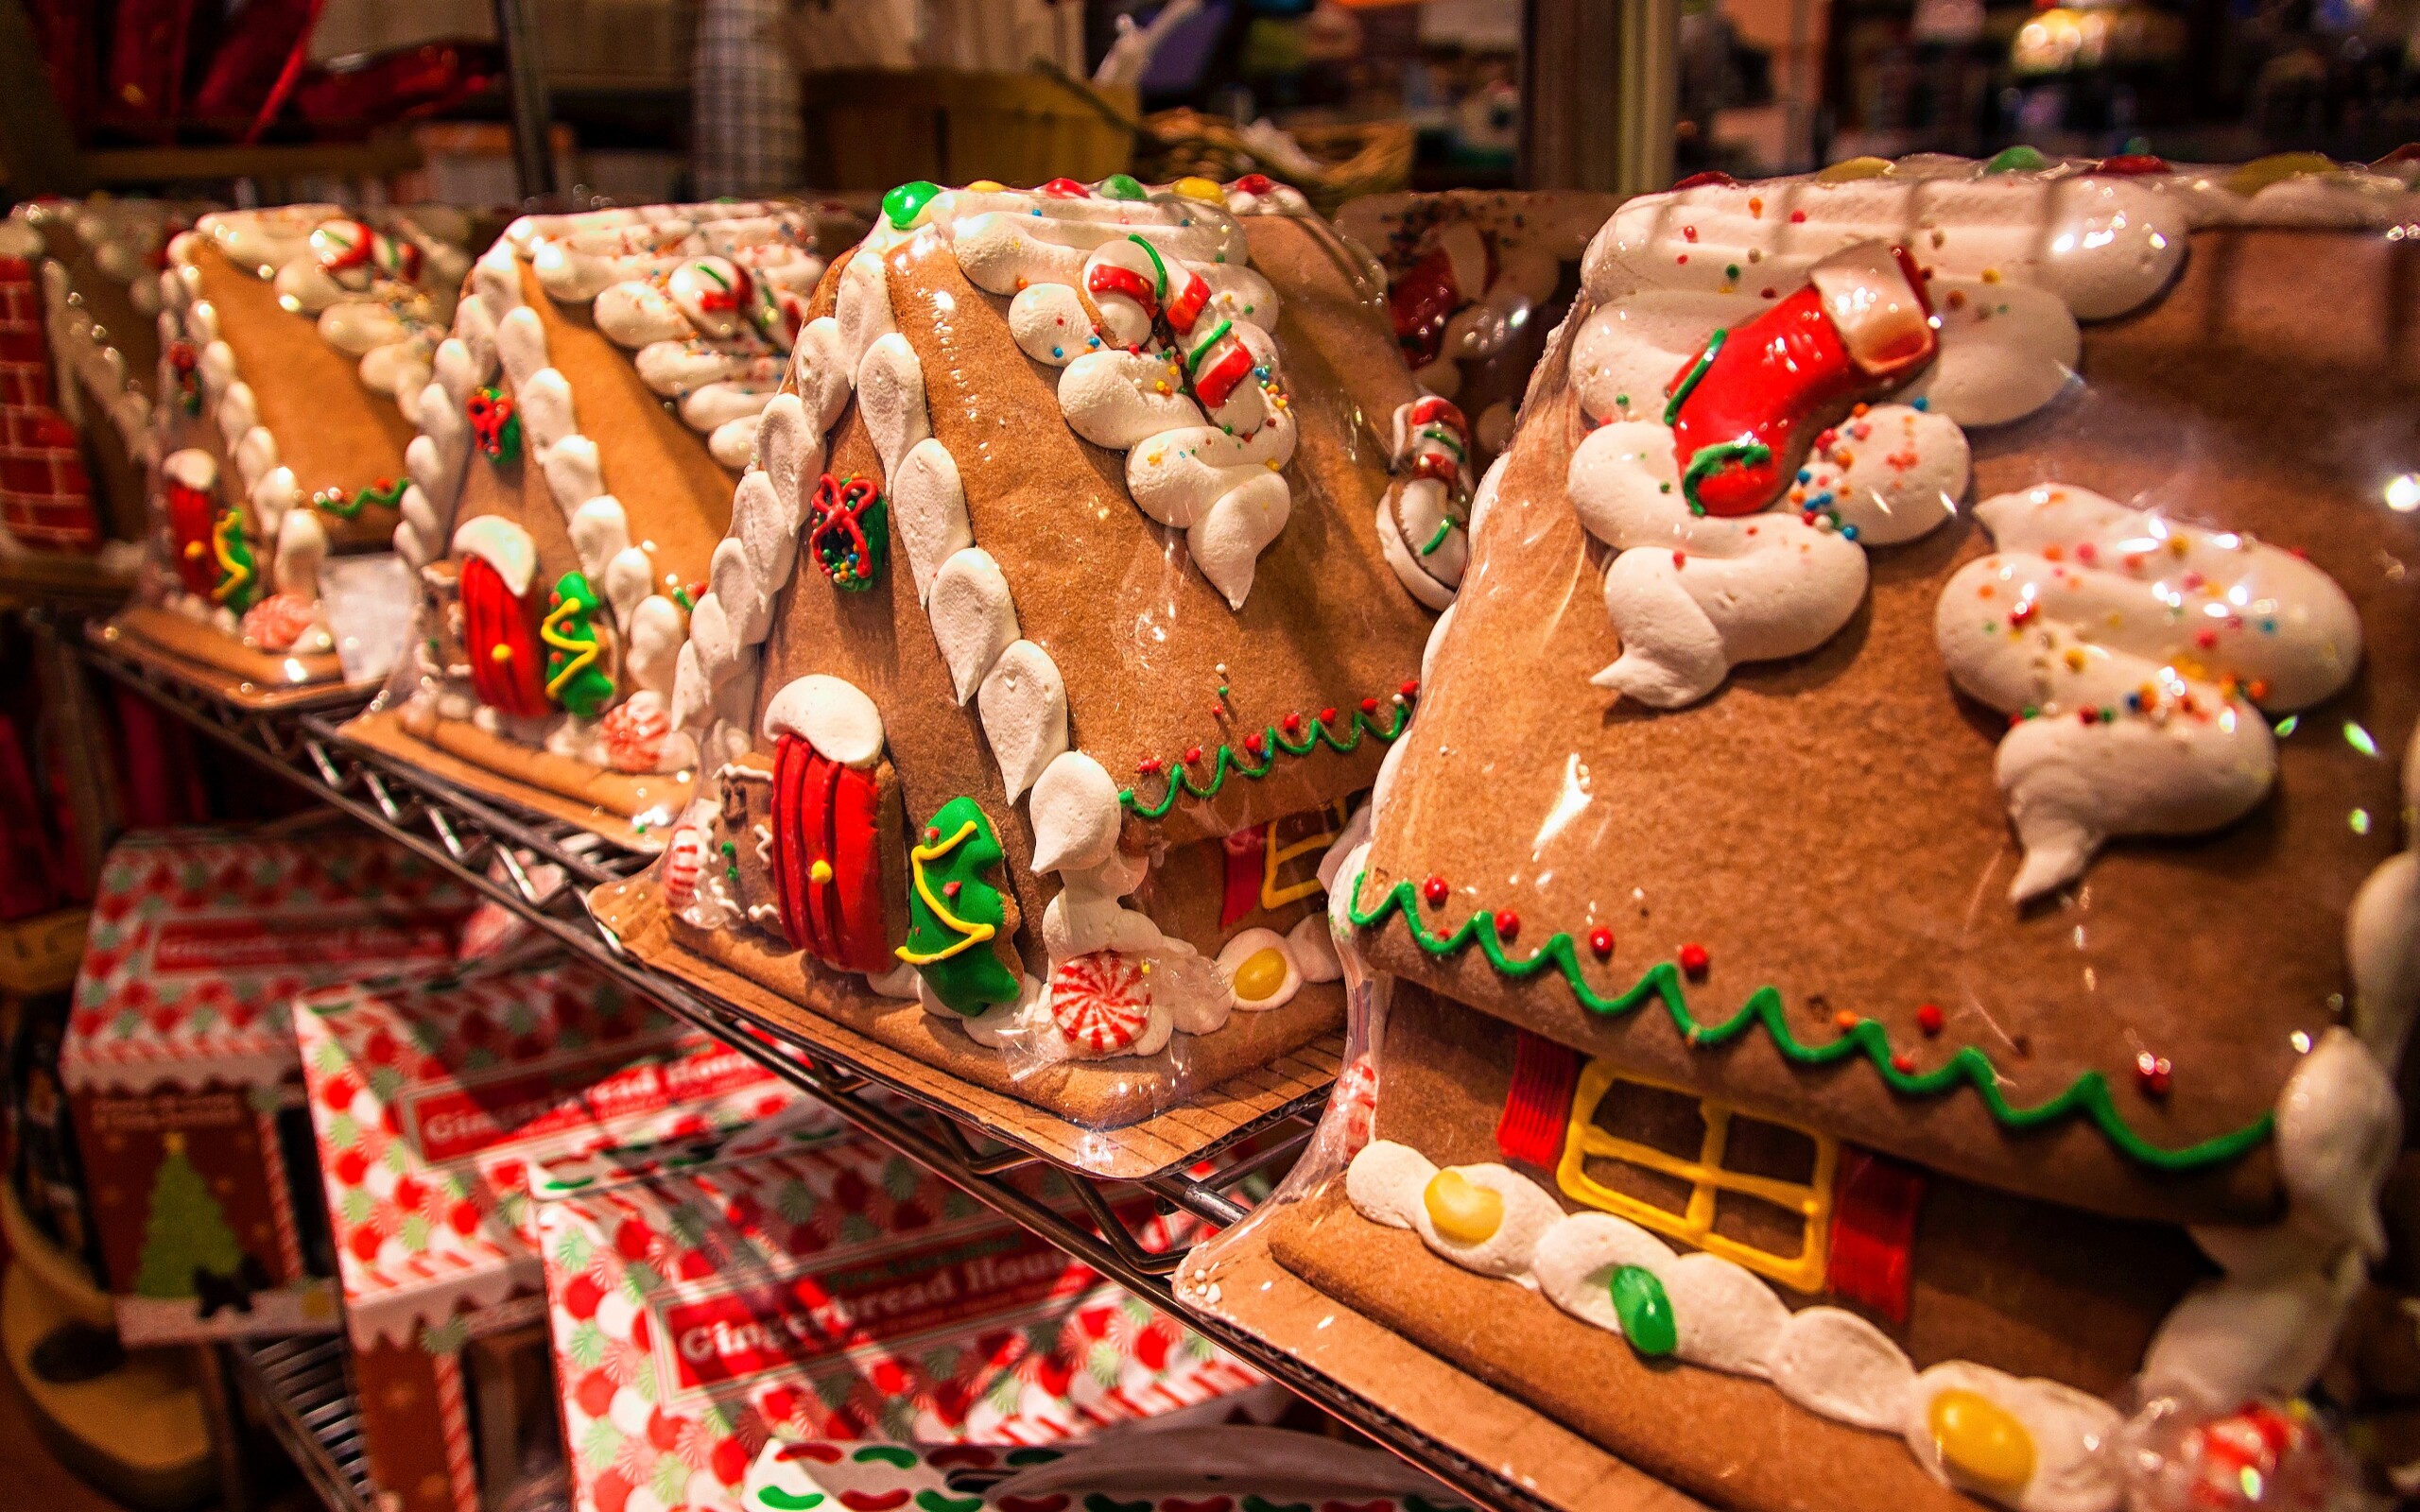 Gingerbread House: Elaborate cookie-walled houses, Intricately piped icing decorations, Sprinkles. 2560x1600 HD Wallpaper.